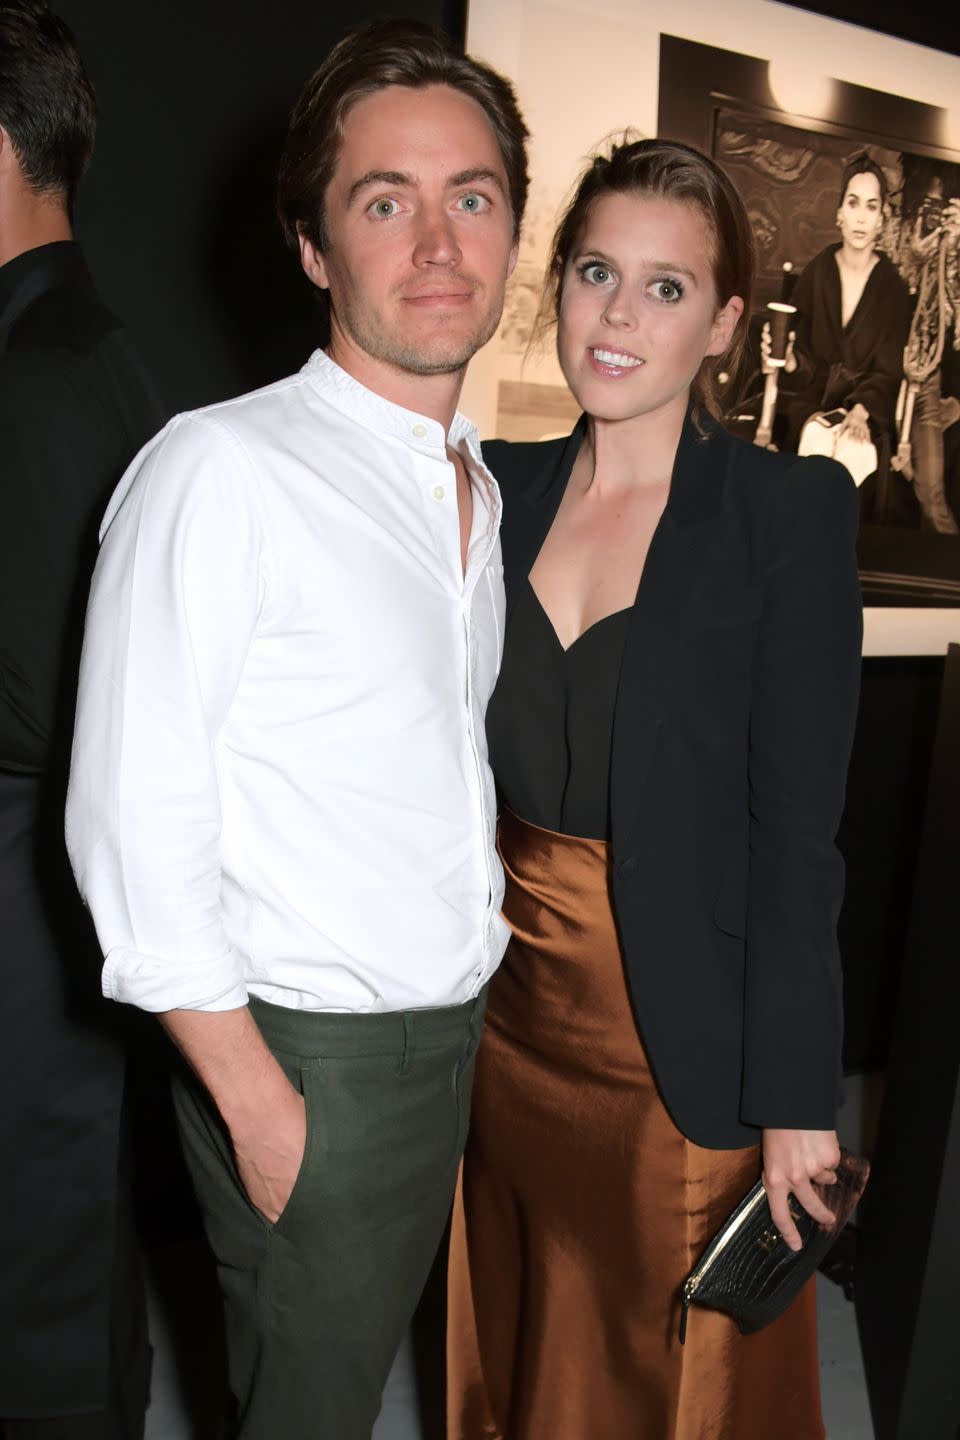 <p>Much like her sister's wedding, when Princess Beatrice walks down the aisle with <a href="https://www.harpersbazaar.com/celebrity/latest/a25235705/who-is-princess-beatrice-boyfriend-edoardo-mapelli-mozzi/" rel="nofollow noopener" target="_blank" data-ylk="slk:Edoardo Mapelli Mozzi" class="link rapid-noclick-resp">Edoardo Mapelli Mozzi</a>, the BBC won't be screening it. <a href="https://www.mirror.co.uk/news/uk-news/princess-beatrices-royal-wedding-wont-21214045" rel="nofollow noopener" target="_blank" data-ylk="slk:The Mirror" class="link rapid-noclick-resp"><em>The Mirror</em></a> reported that the BBC would not broadcast the whole wedding, instead offering news coverage of the event at intervals throughout the day. It's unclear whether ITV will nab the rights instead. At this point (April 2020), the wedding has been called off for now because of the coronavirus pandemic.</p>